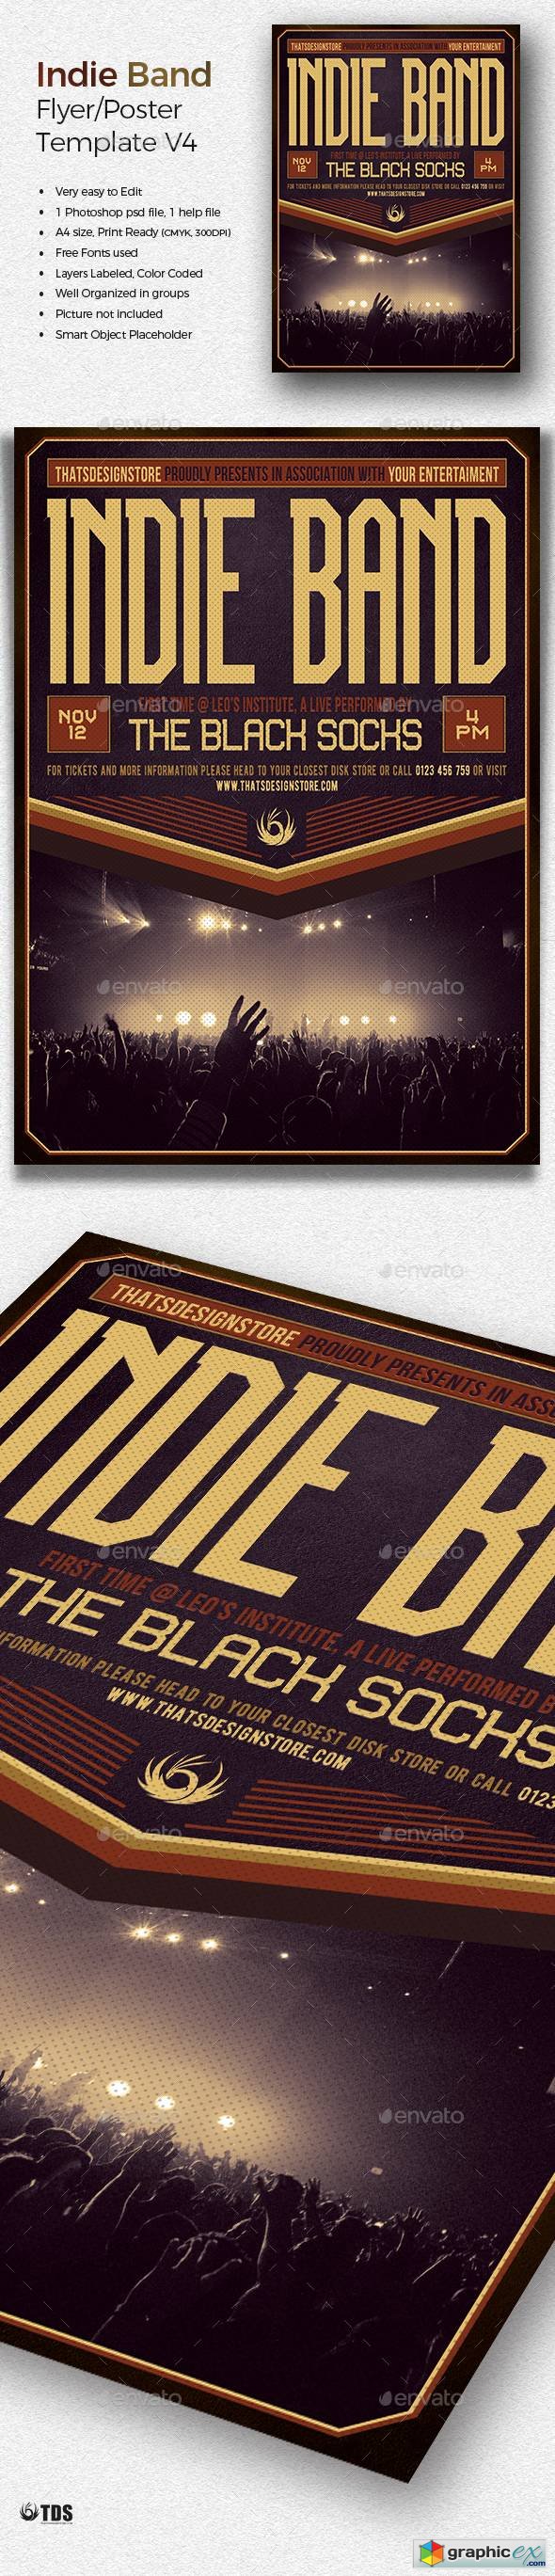 Indie Band Flyer Template V4